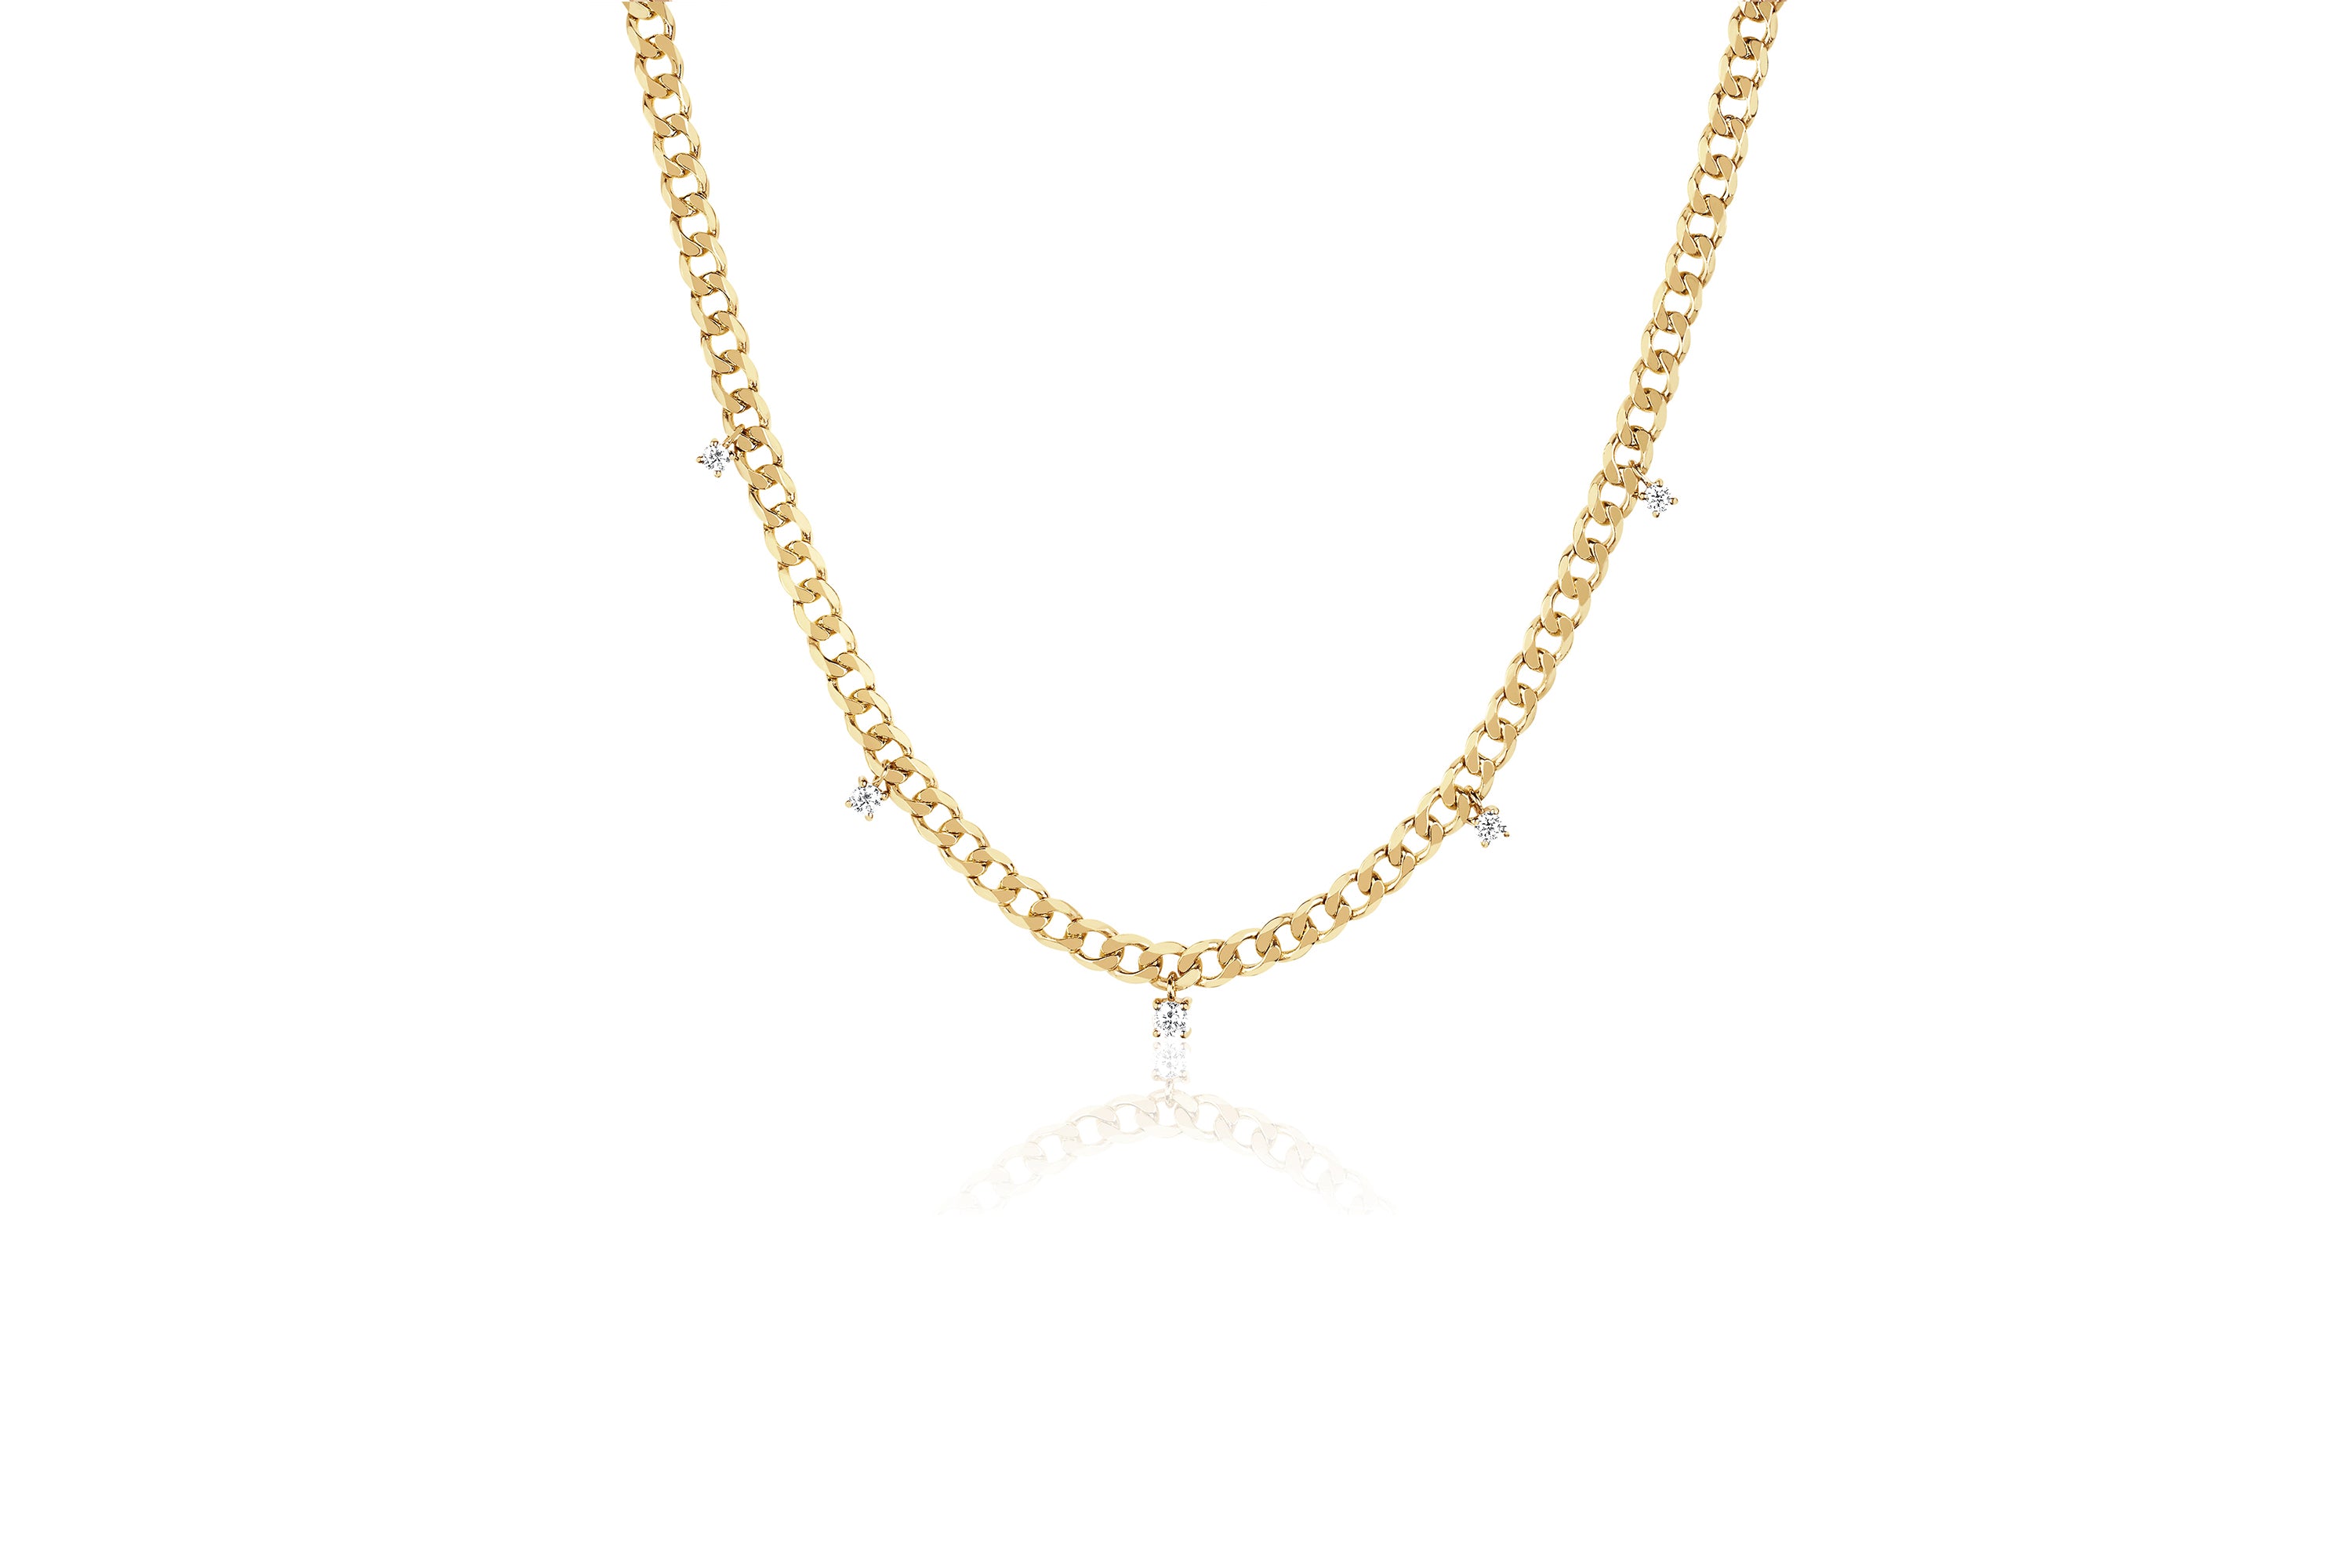 14k (karat) yellow gold curb chain necklace with 5 prong set diamonds